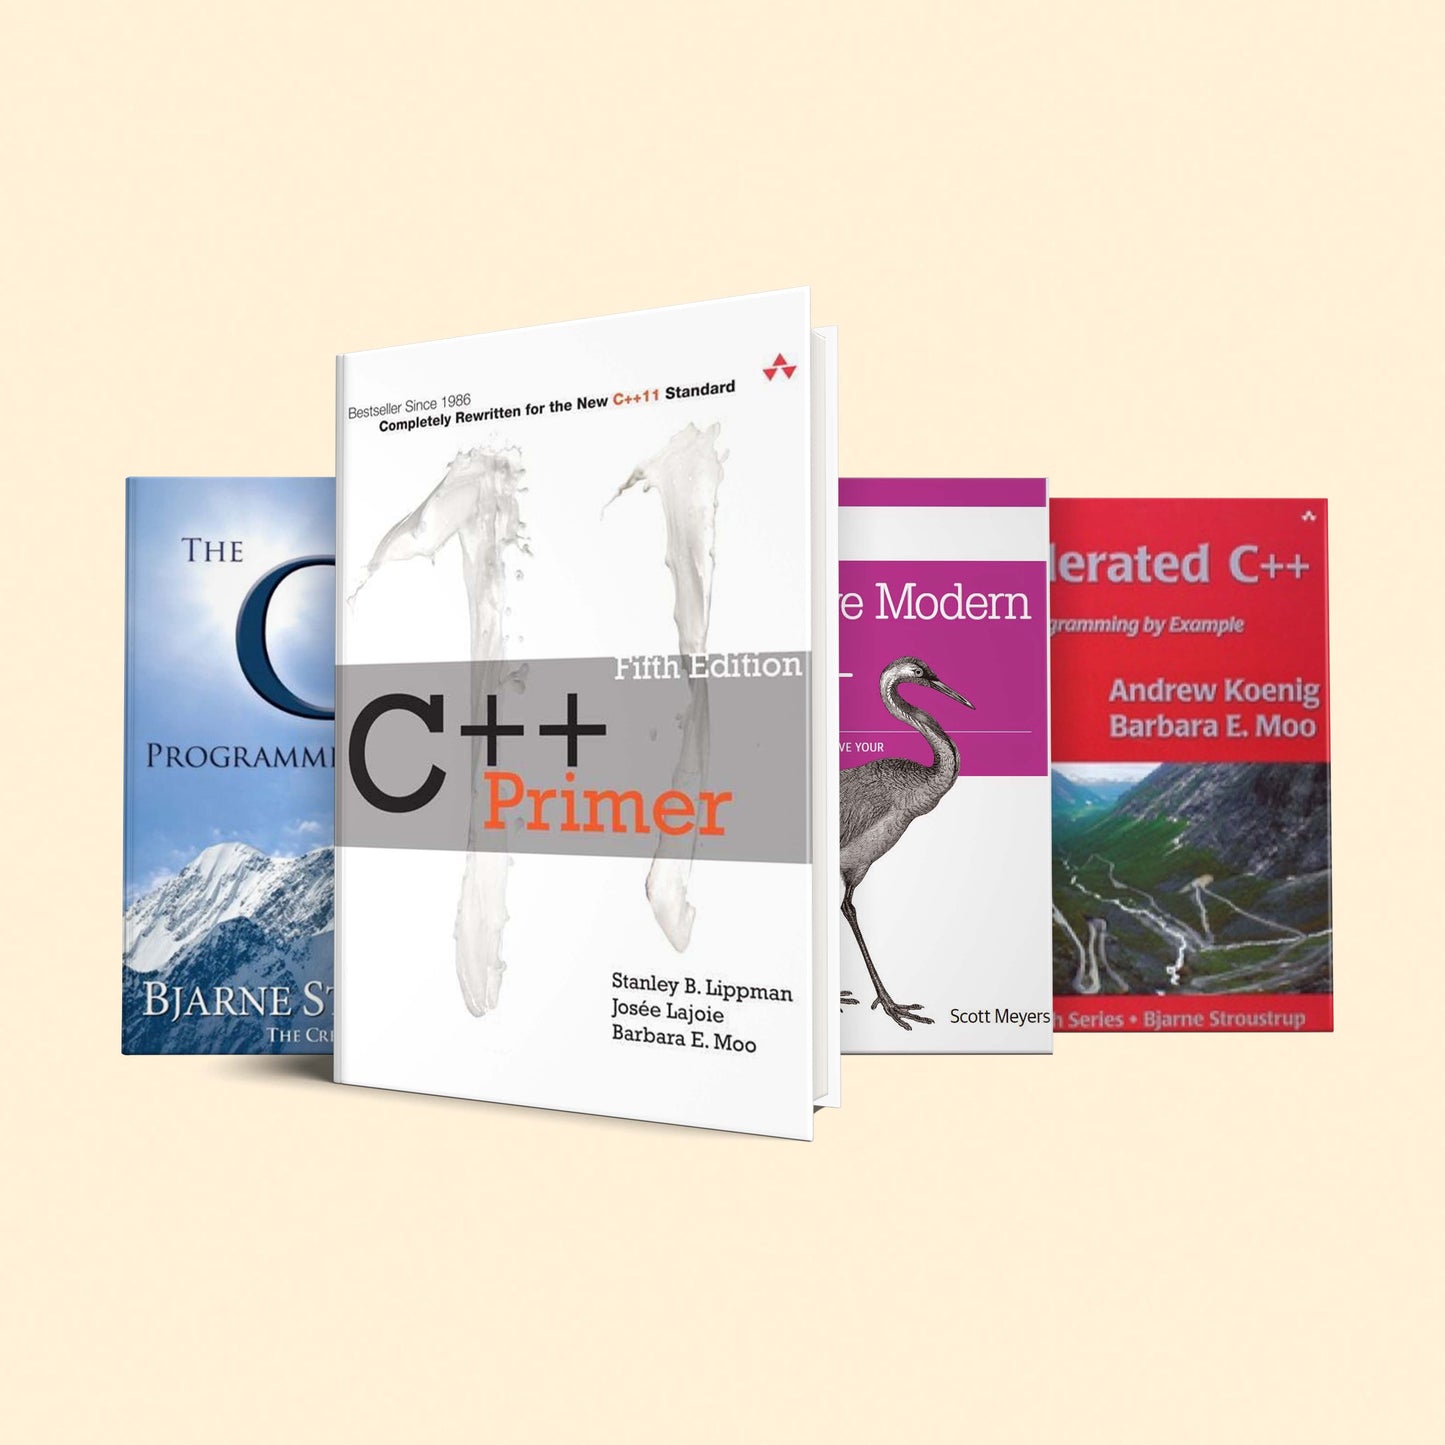 4 C++ programming book set : C++ Primer (5th Edition), Effective Modern C++, The C++ Programming Language (4th Edition), Accelerated C++: Practical Programming by Example